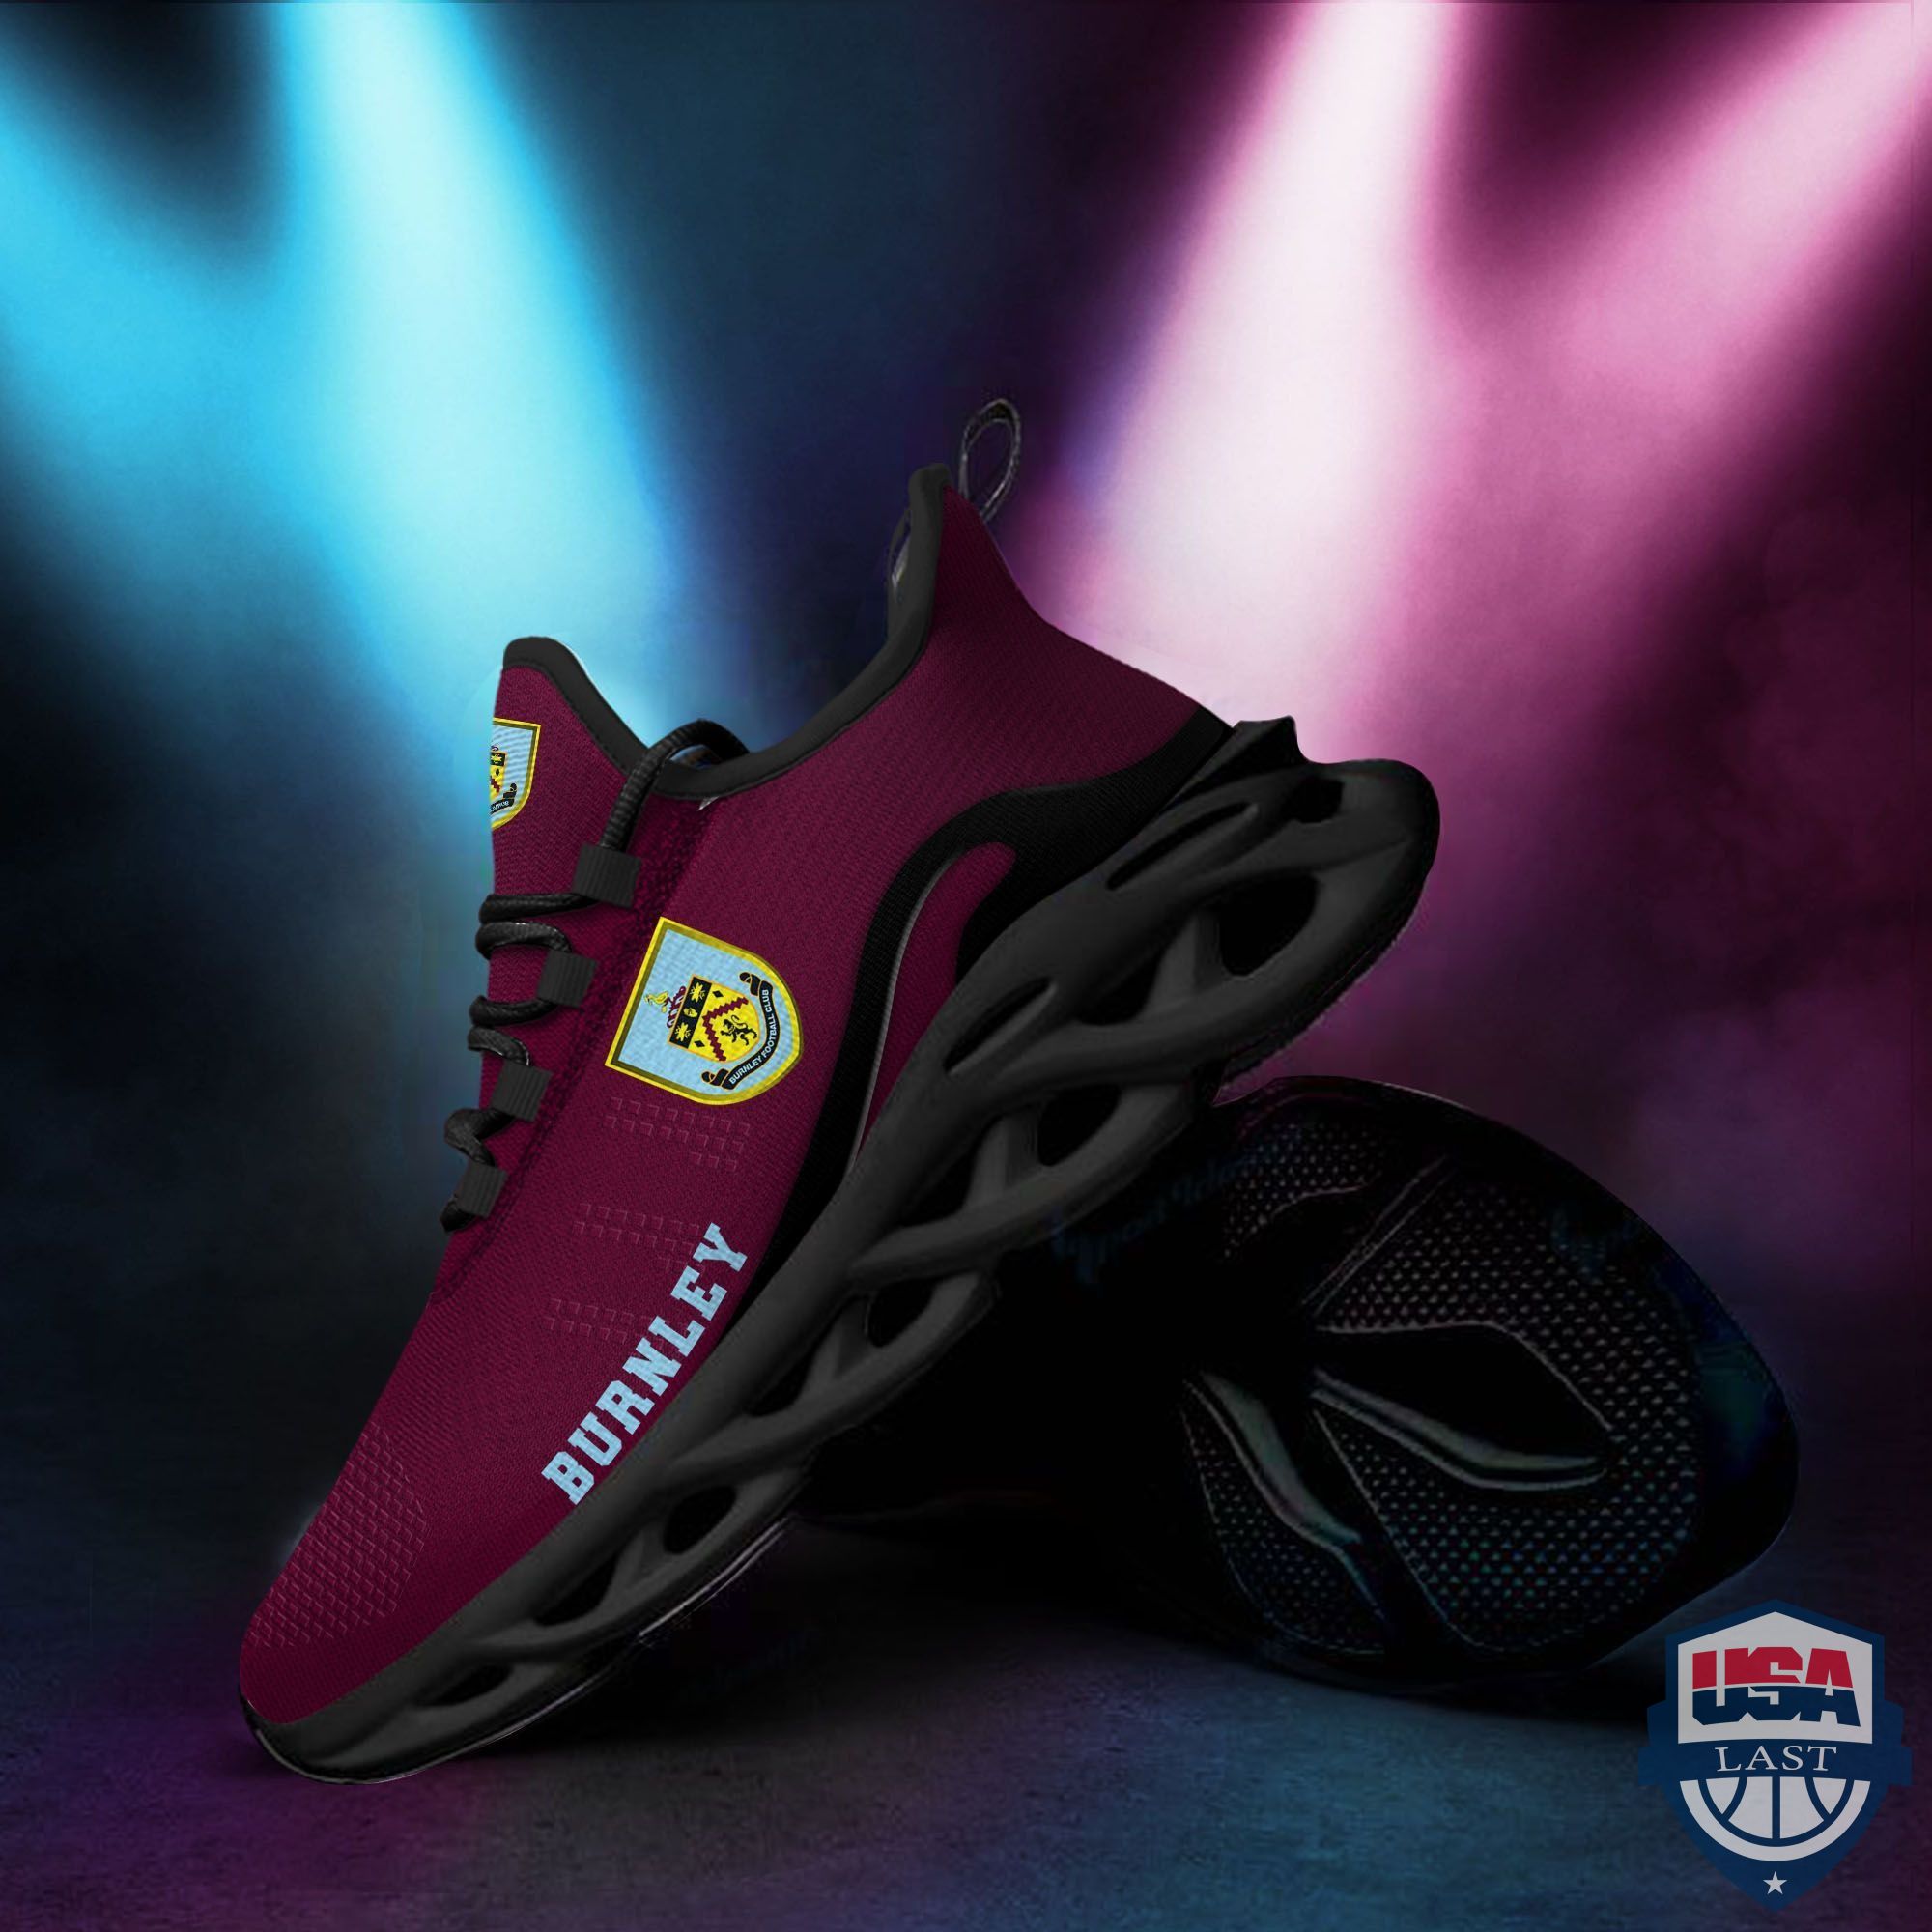 EPL Burnley Max Soul Clunky Sneaker Shoes